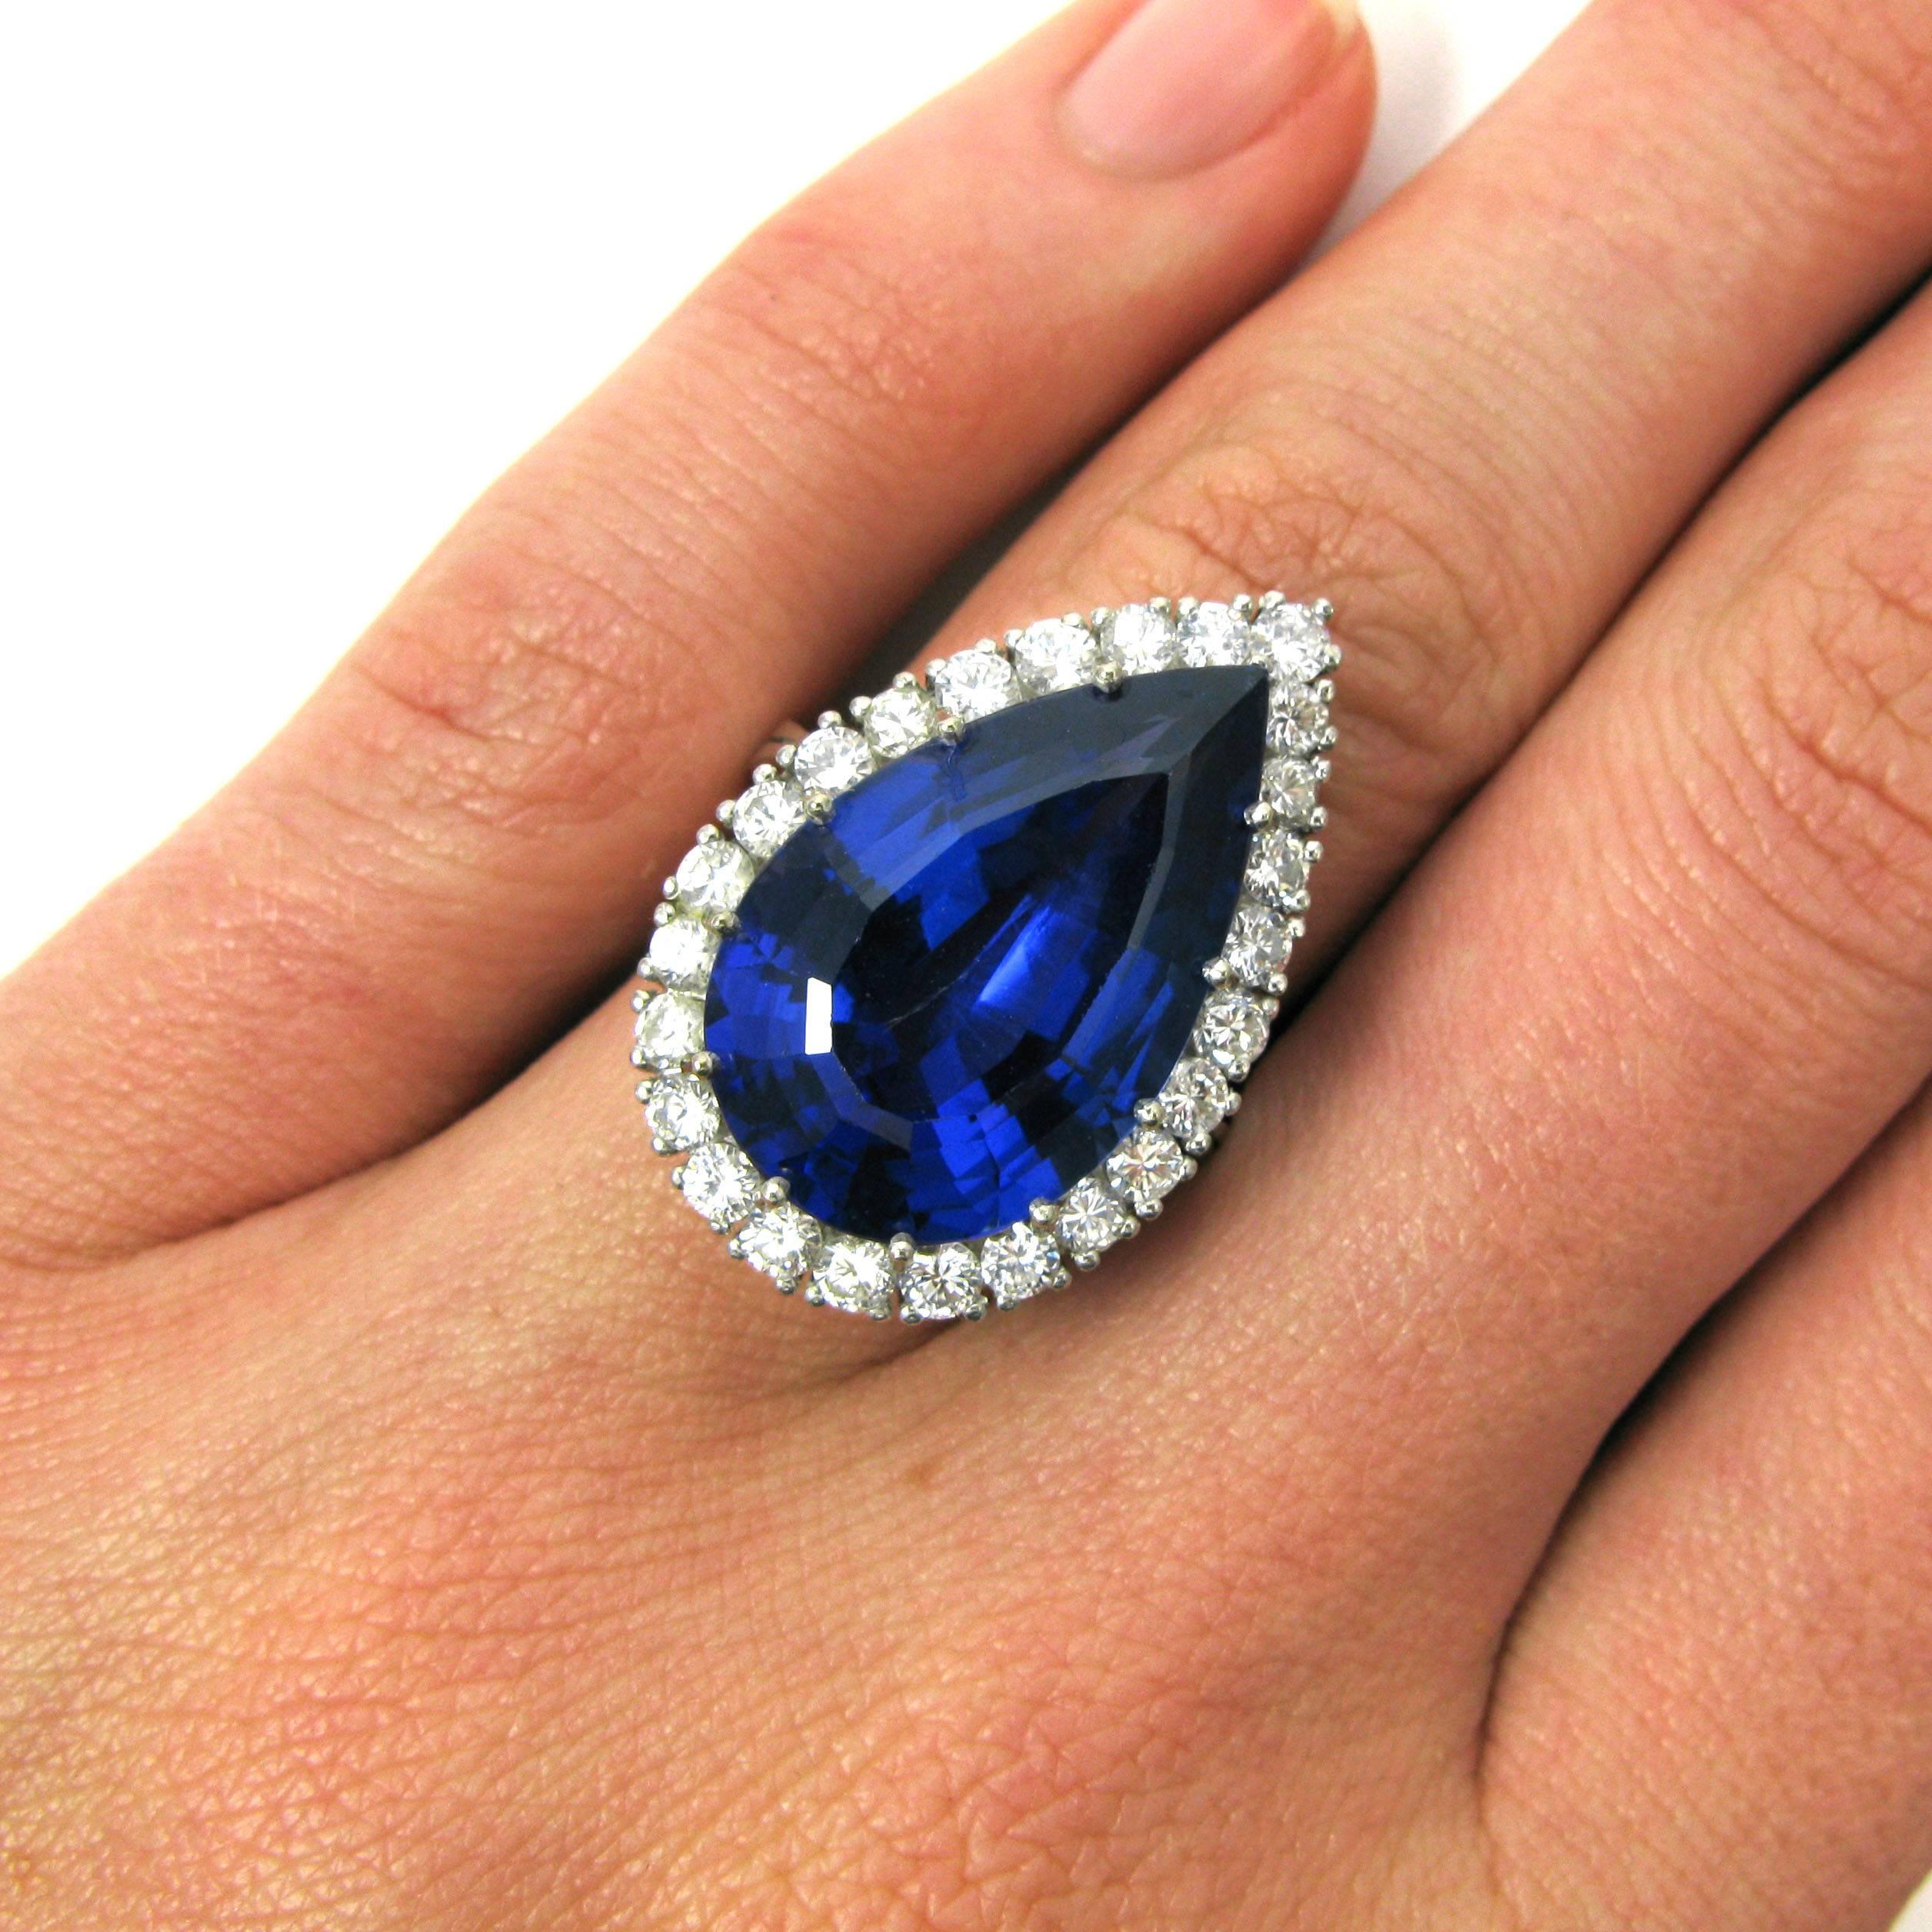 A lovely 13.75 carat pear shaped tanzanite is set into a ballerina-style cocktail ring surrounded by 25 round brilliant-cut diamonds atop a reverse-tapered double ring shank. The tanzanite has a deep, gemmy violet hue while the diamonds weigh